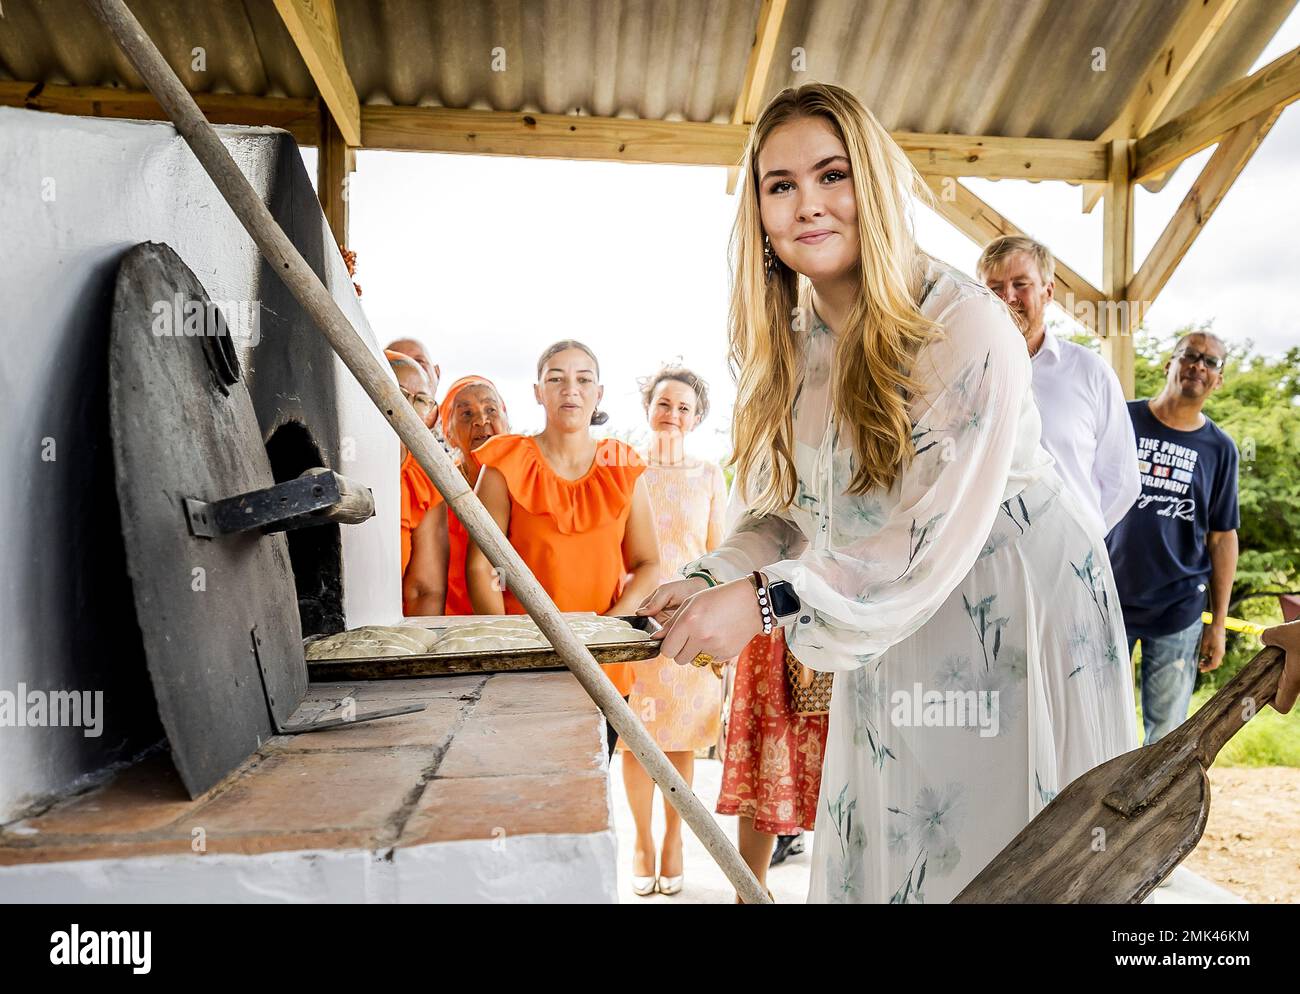 BONAIRE - Princess Amalia bakes a loaf of bread during the visit of the royal couple and Princess Amalia to Cultural Park Mangazina di Rei on Bonaire. The Crown Princess has a two-week introduction to the countries of Aruba, Curacao and Sint Maarten and the islands that form the Caribbean Netherlands: Bonaire, Sint Eustatius and Saba. ANP REMKO DE WAAL netherlands out - belgium out Stock Photo